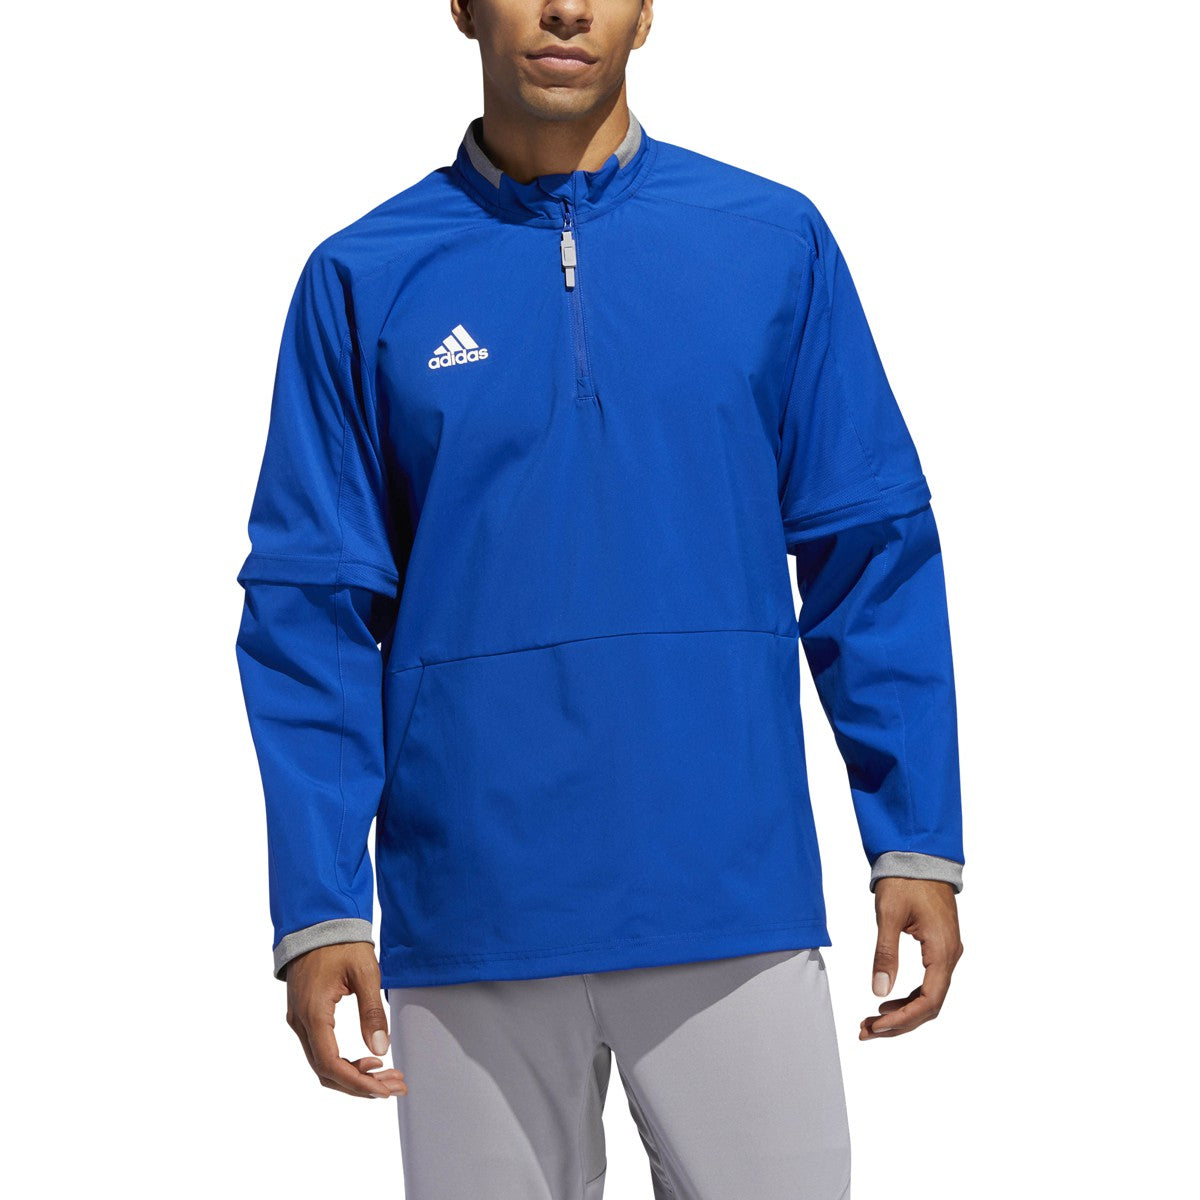 Baseball Cage Jackets All – League Outfitters